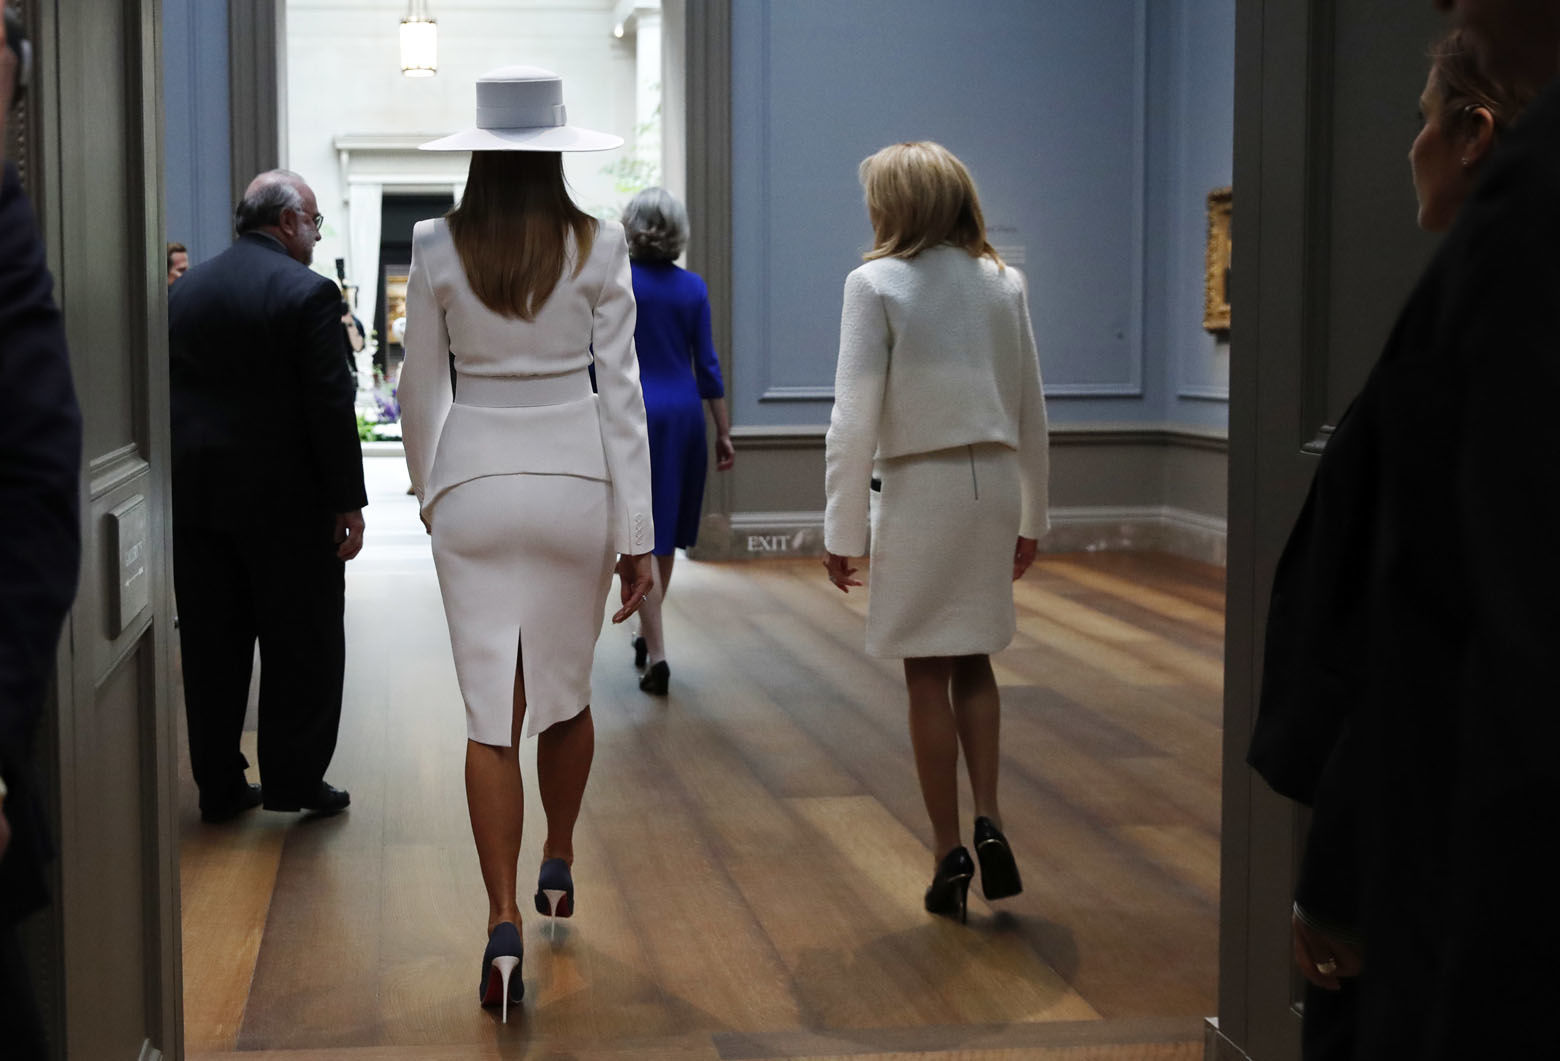 First lady Melania Trump, left, and Brigitte Macron, wife of French President Emmanuel Macron, tour the National Gallery of Art, Tuesday April 24, 2018, in Washington. (AP Photo/Jacquelyn Martin)